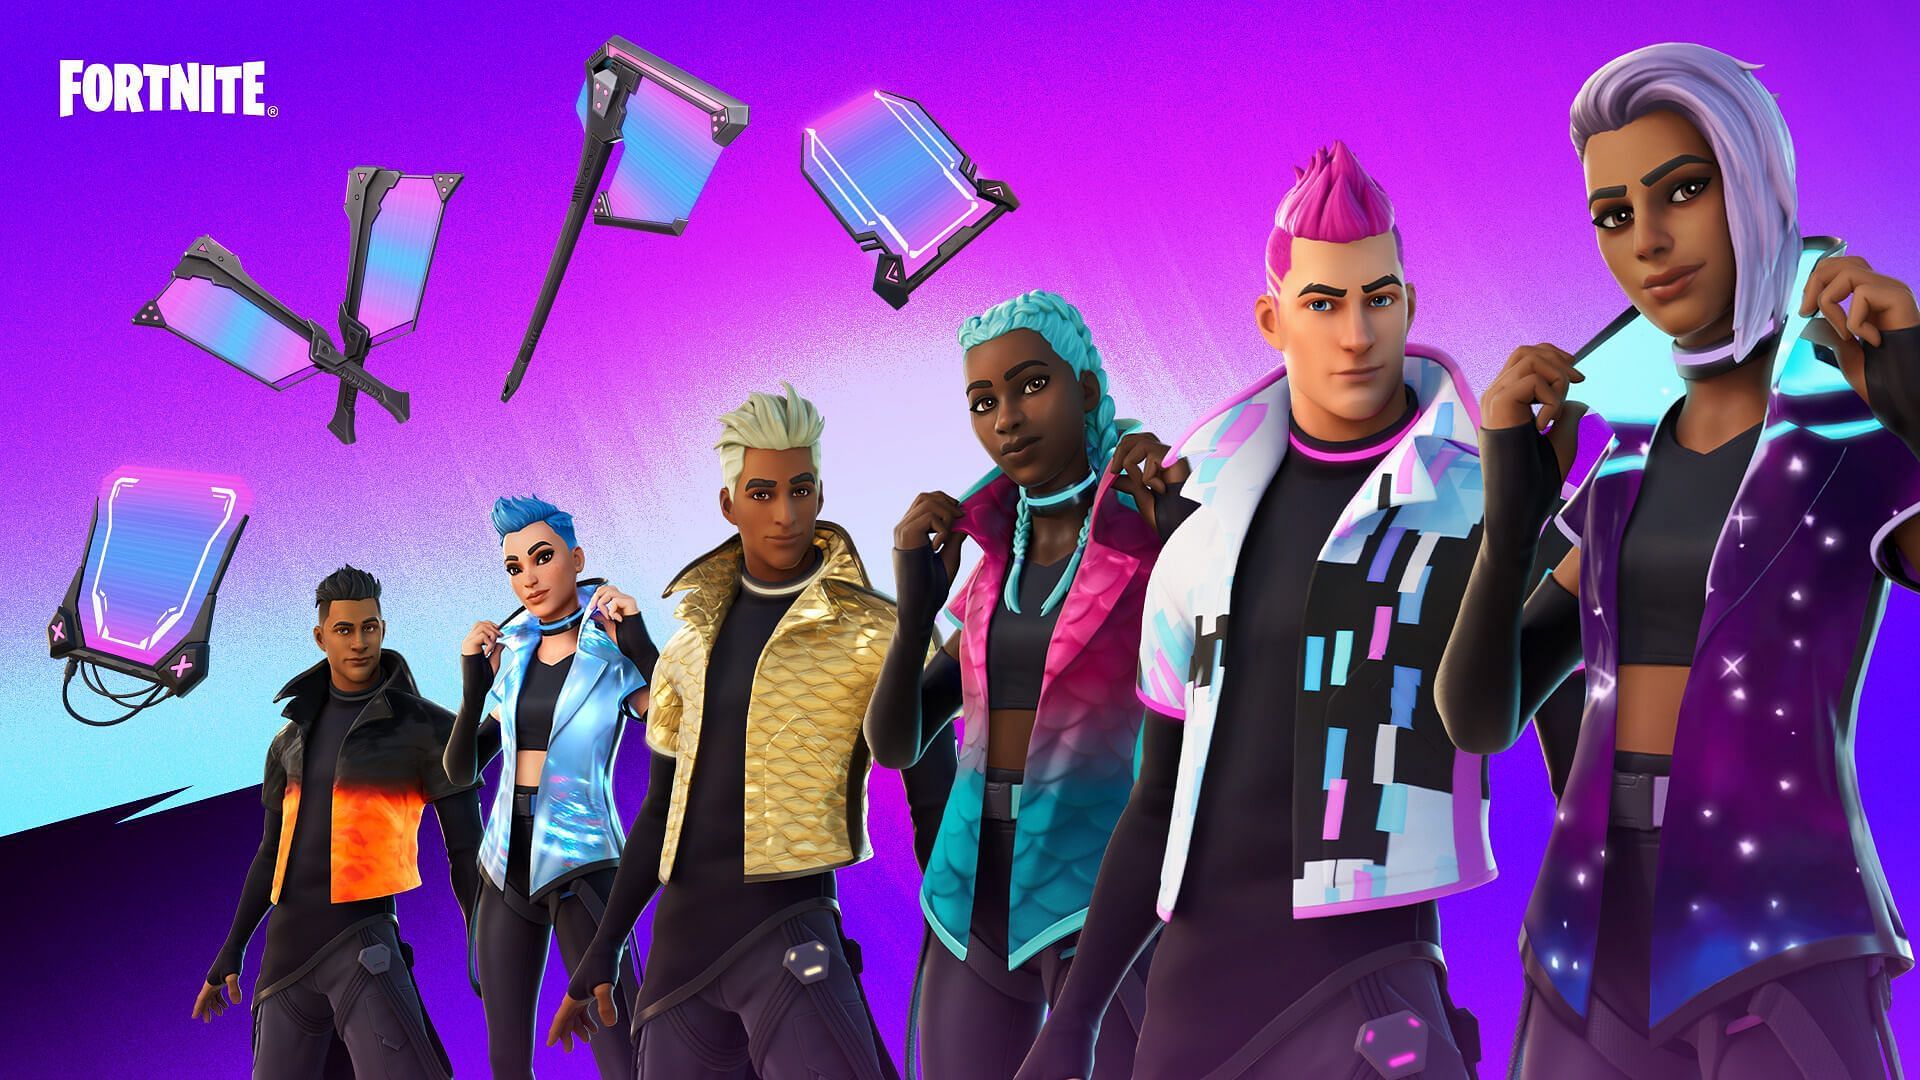 Fortnite has several customizable skins that can work well with this wrap (Image via Epic Games)